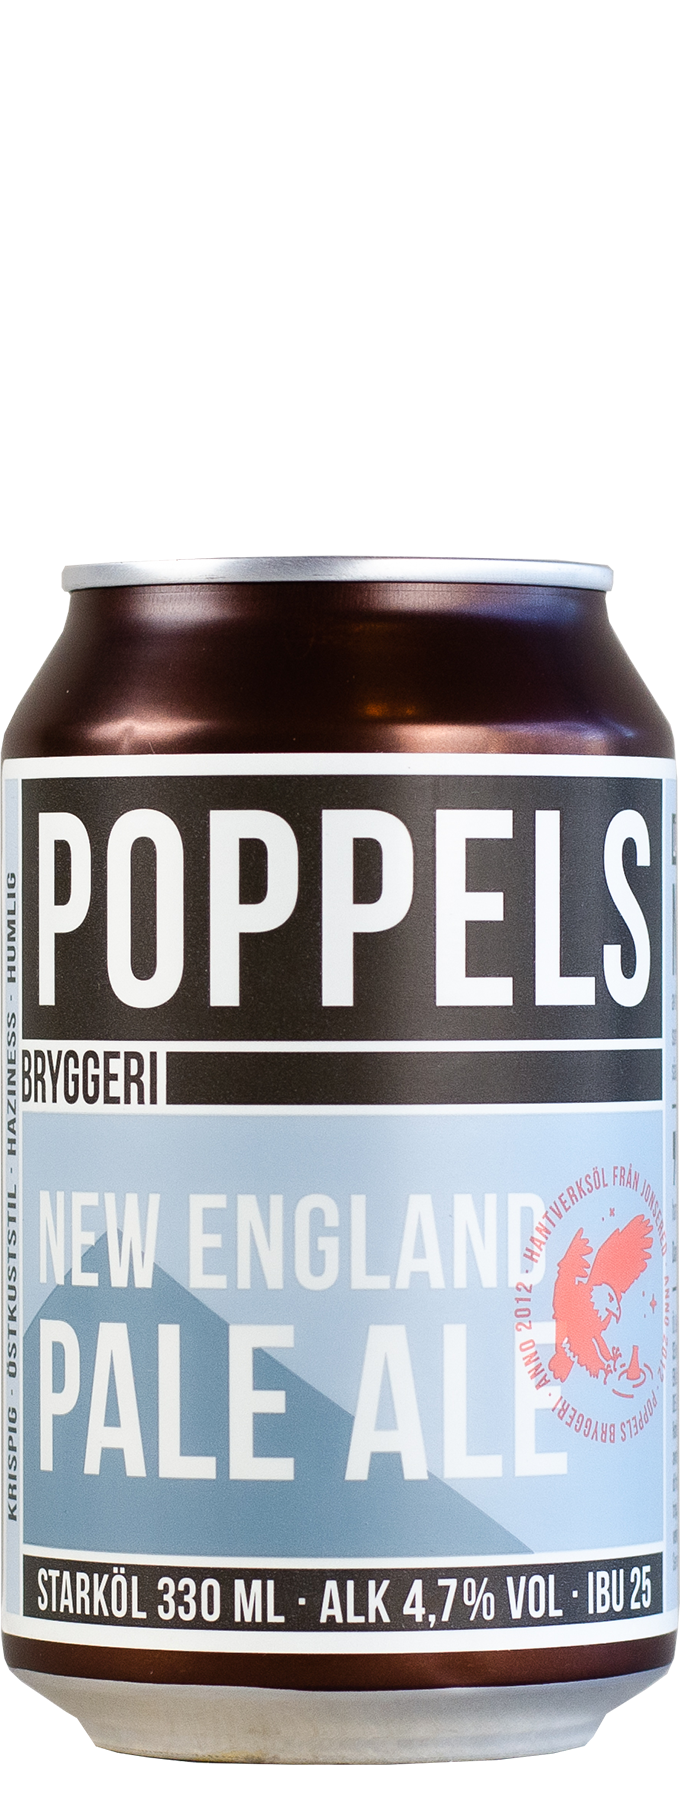 Poppels - Bryggeri New England Pale Ale 4.7% ABV 330ml Can